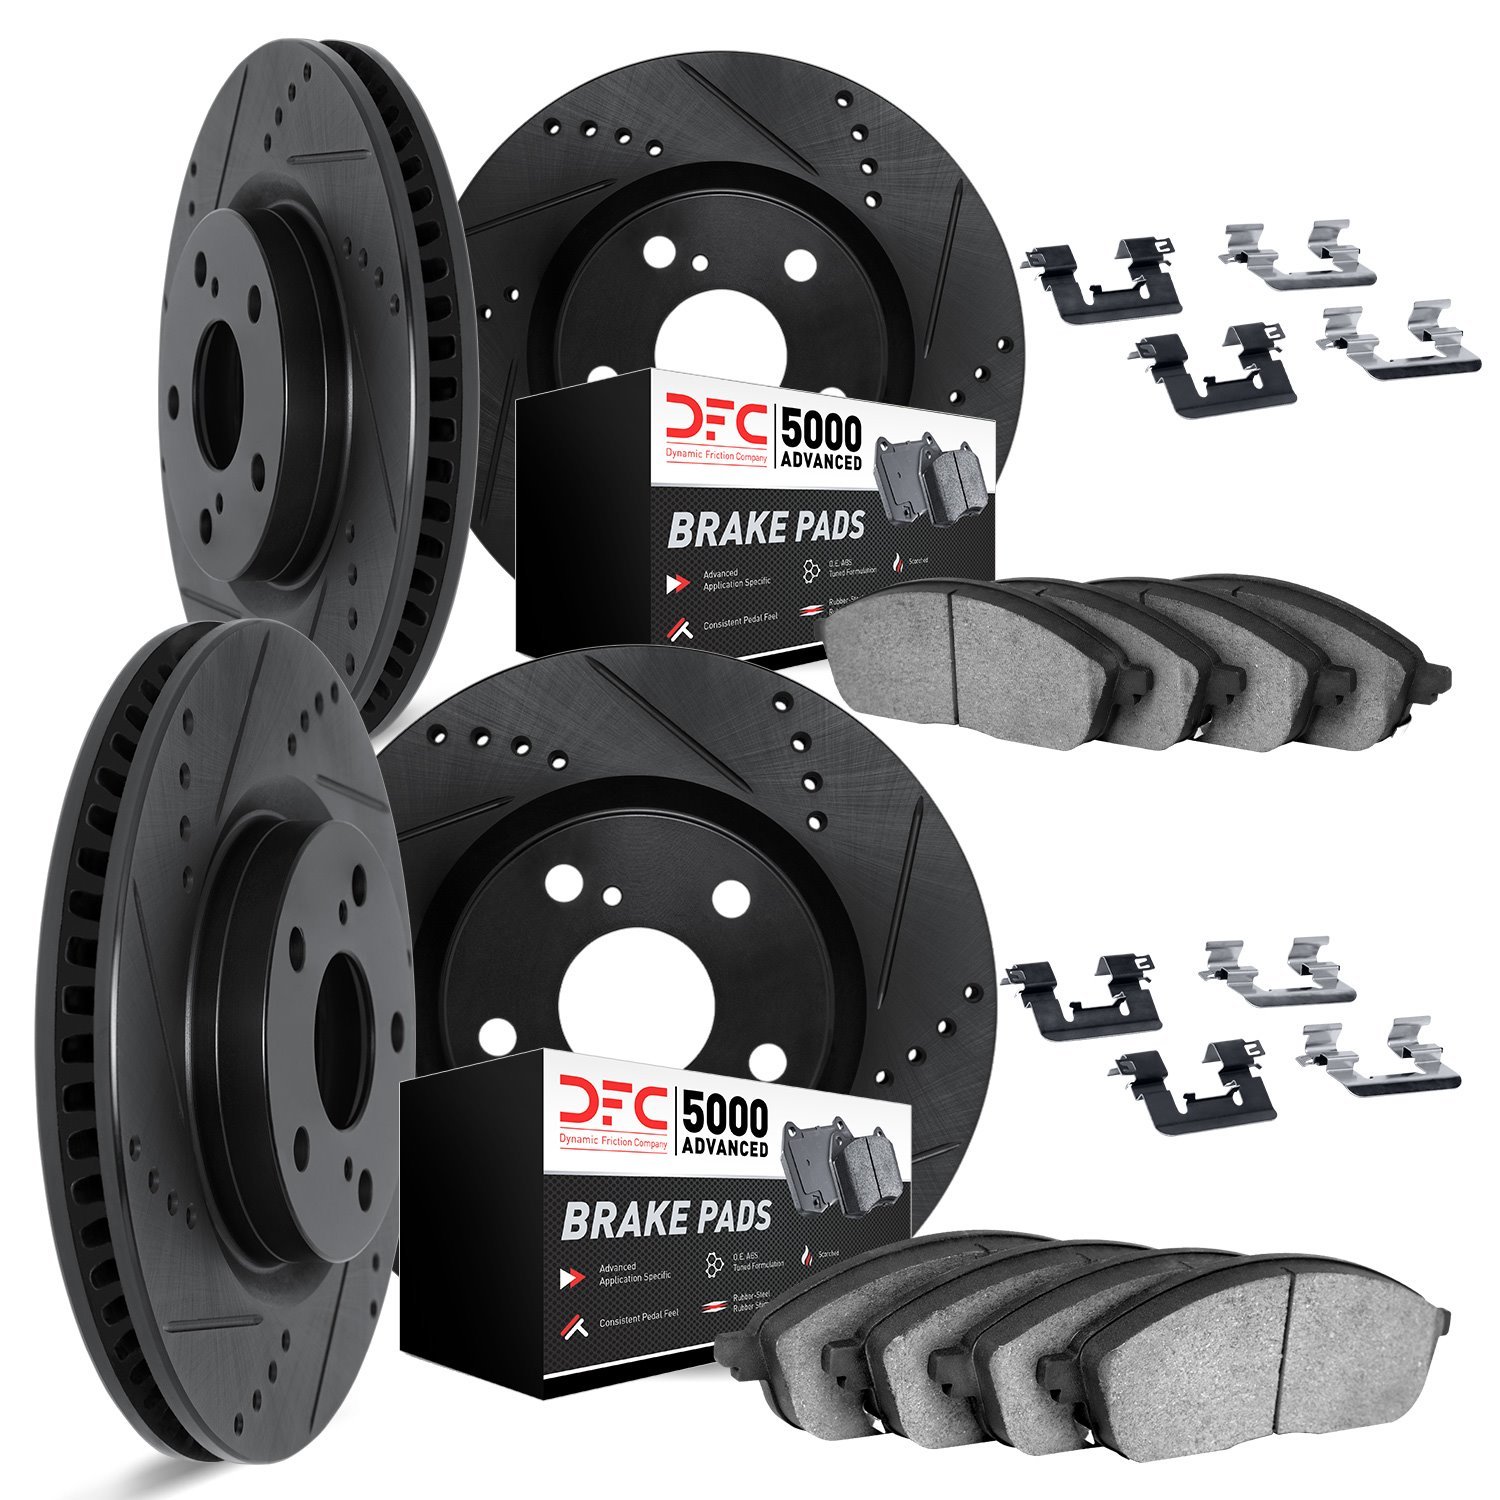 8514-13024 Drilled/Slotted Brake Rotors w/5000 Advanced Brake Pads Kit & Hardware [Black], Fits Select Subaru, Position: Front a